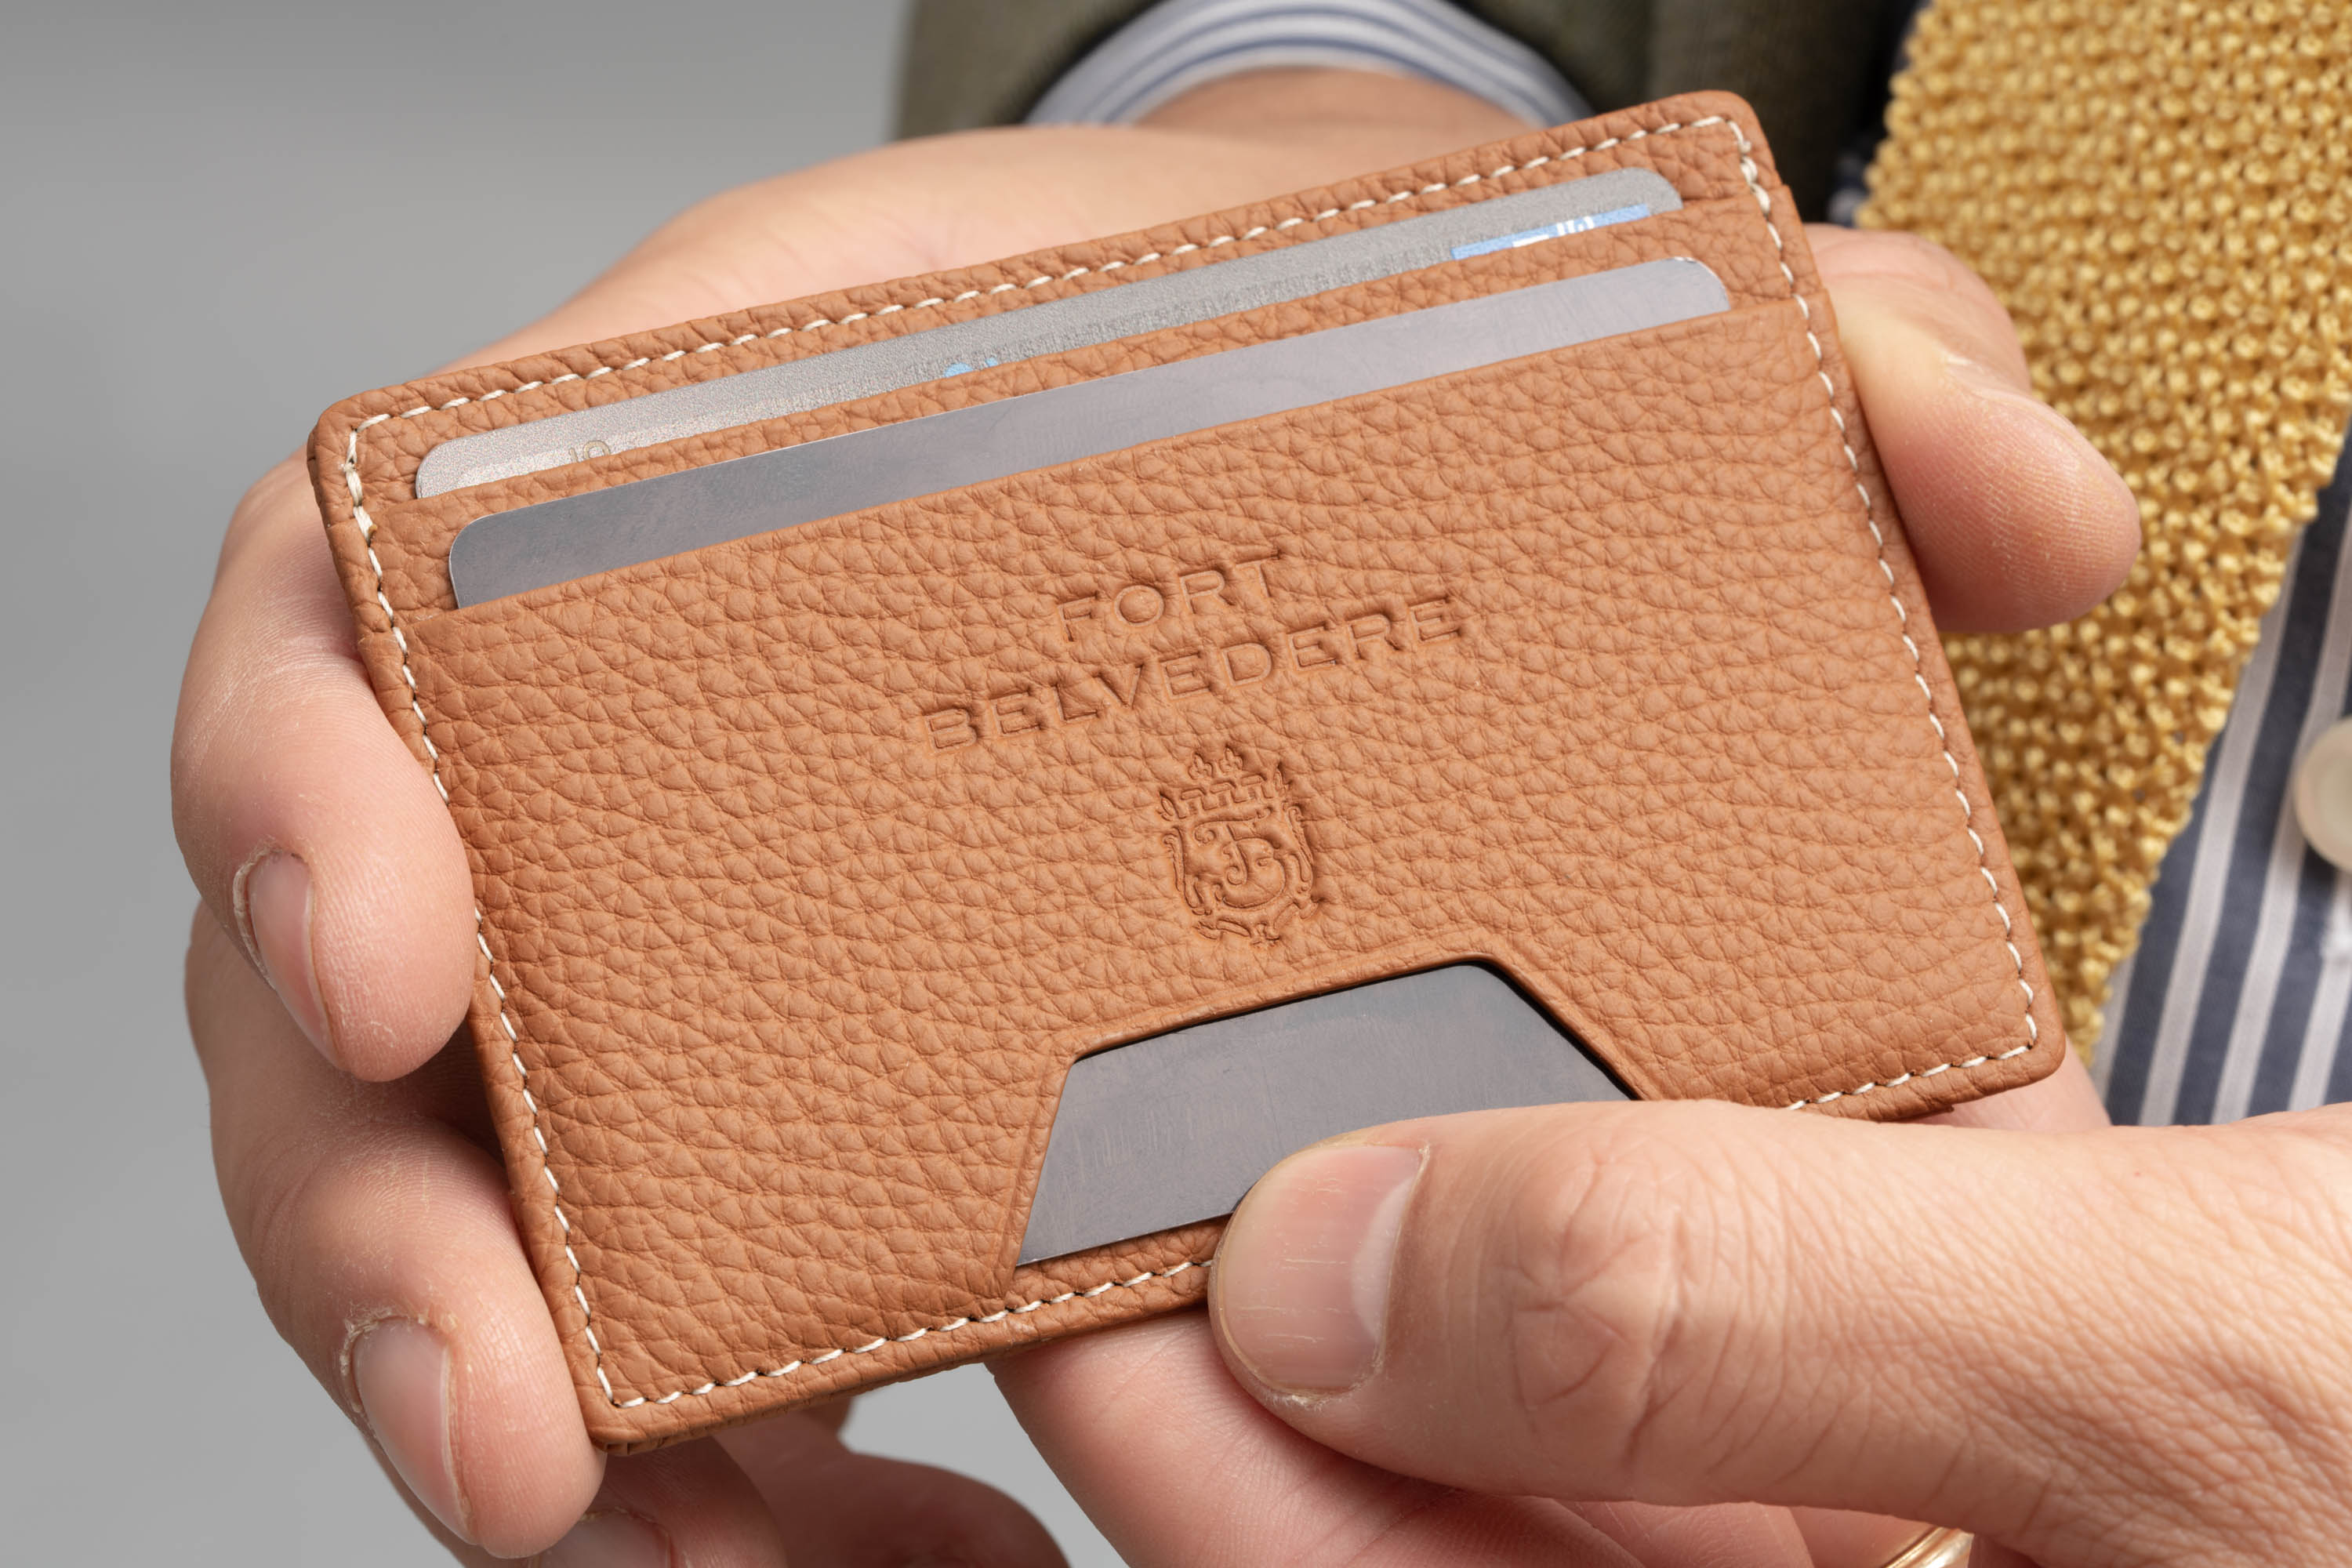 The Golden Brown Togo Full-Grain Leather 4CC Wallet is extensively tested.